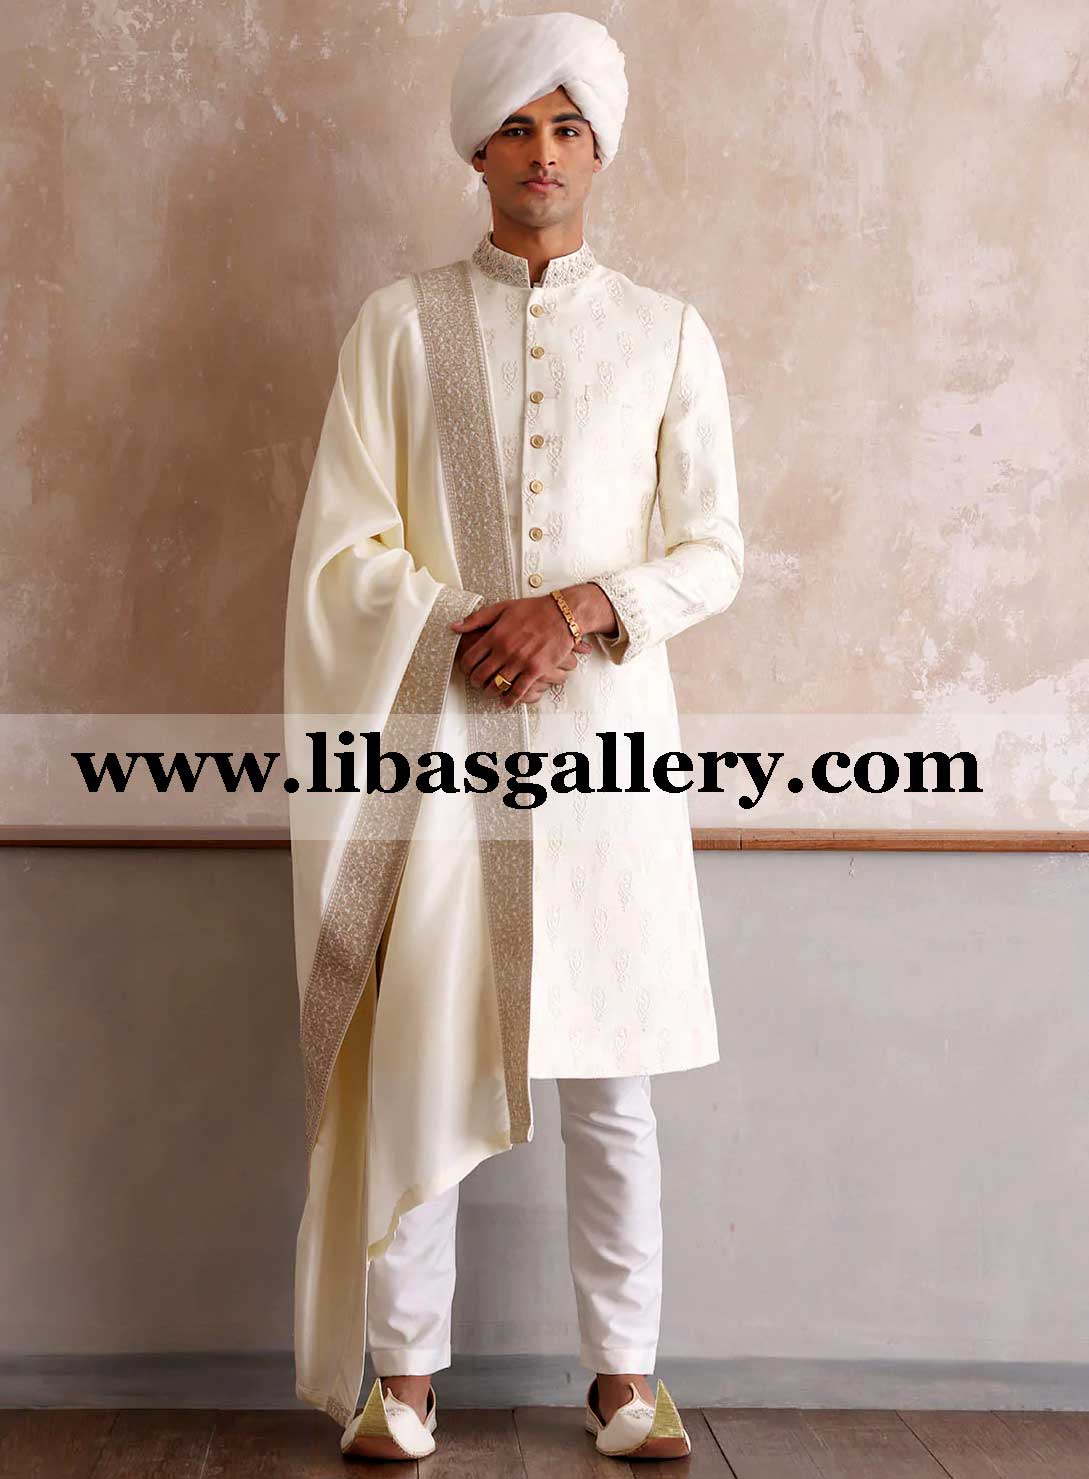 Luxurious Journey for the whole family to buy groom sherwani suit